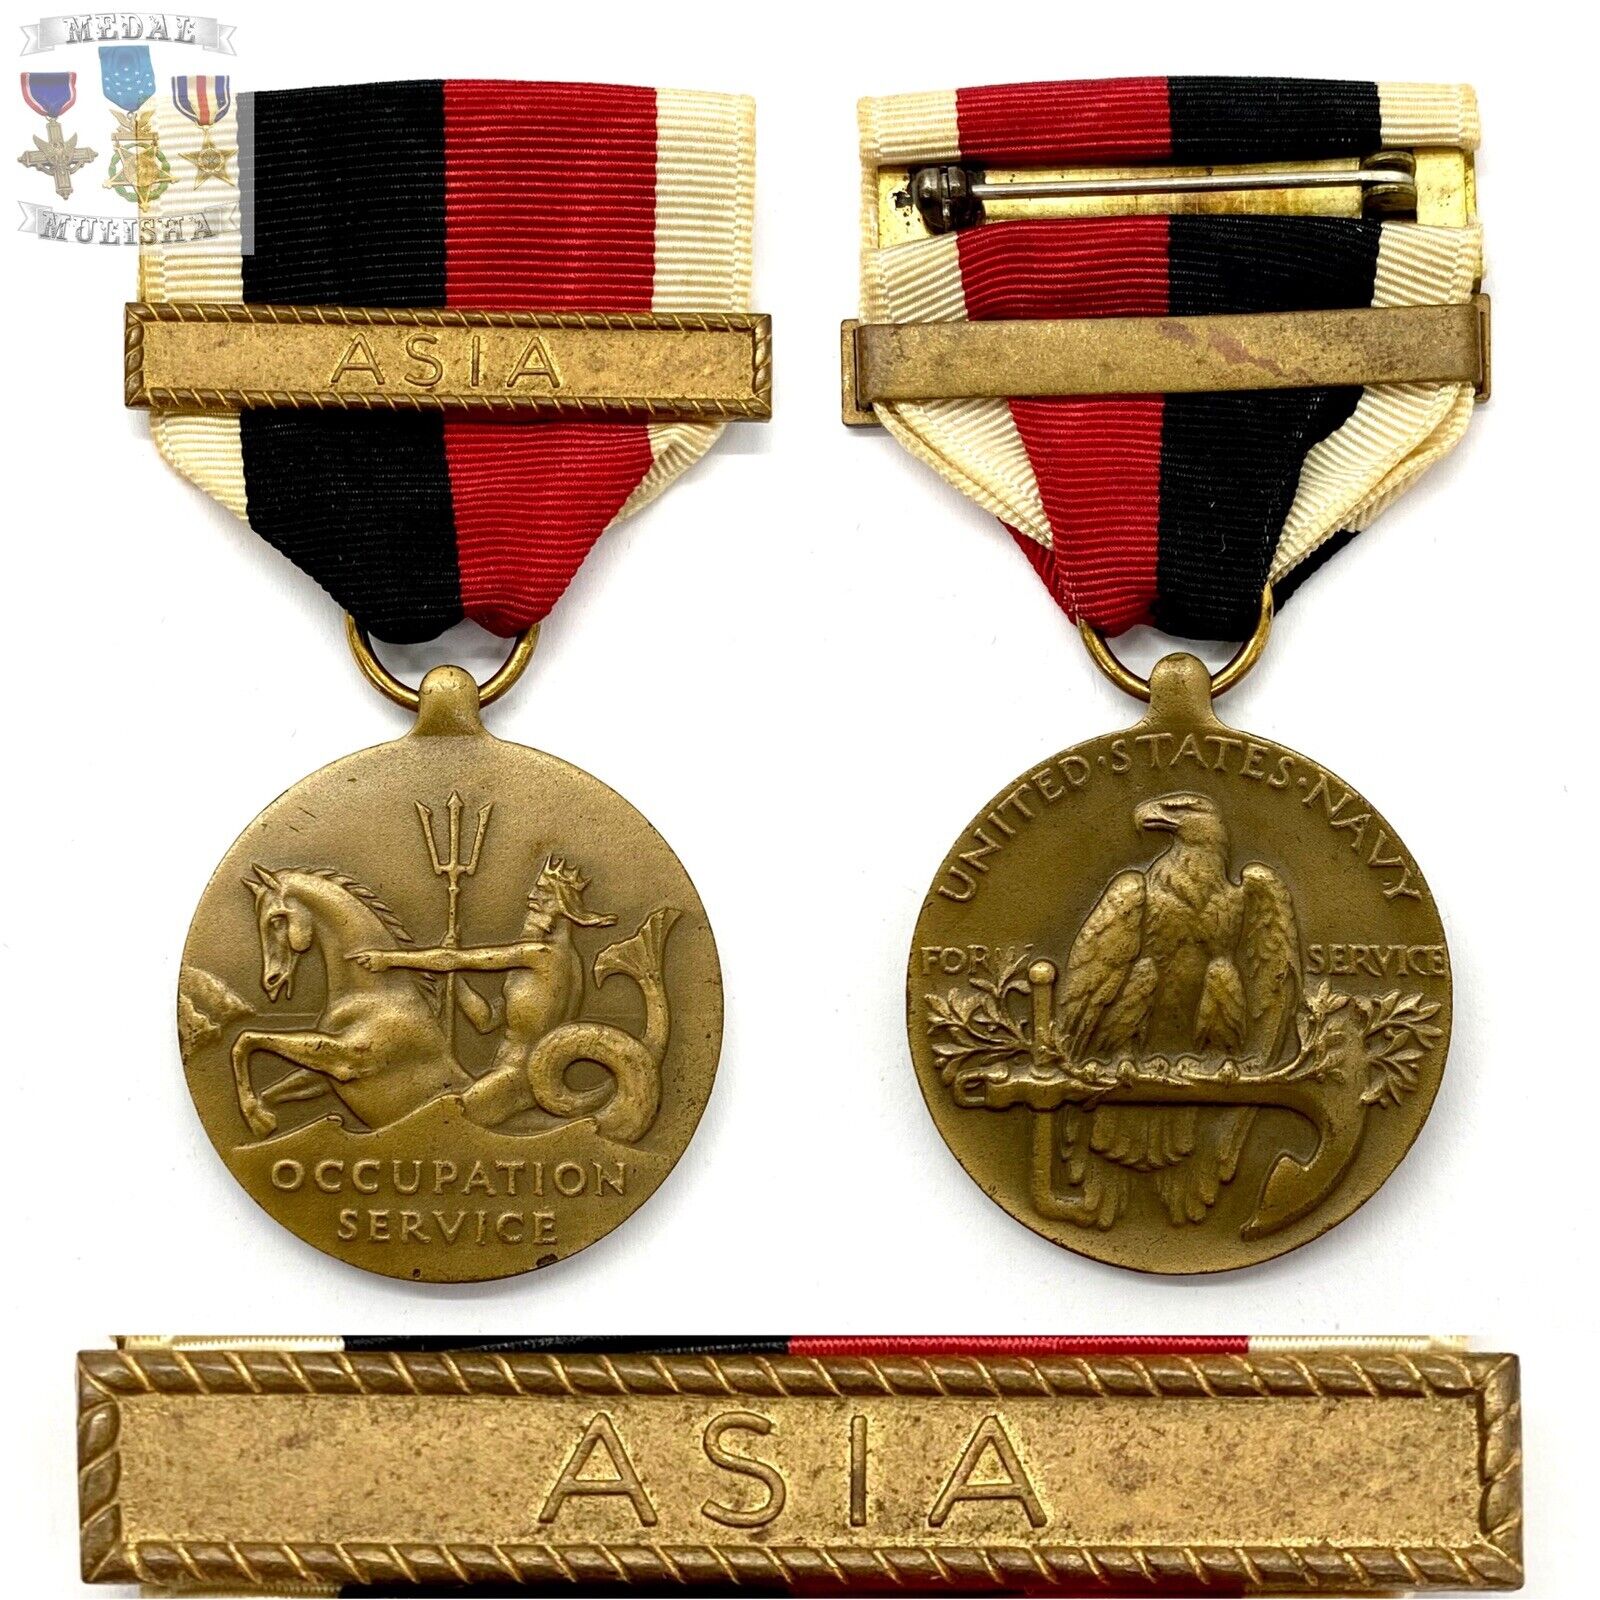 WWII NAVY OCCUPATION SERVICE MEDAL ASIA CLASP WW2